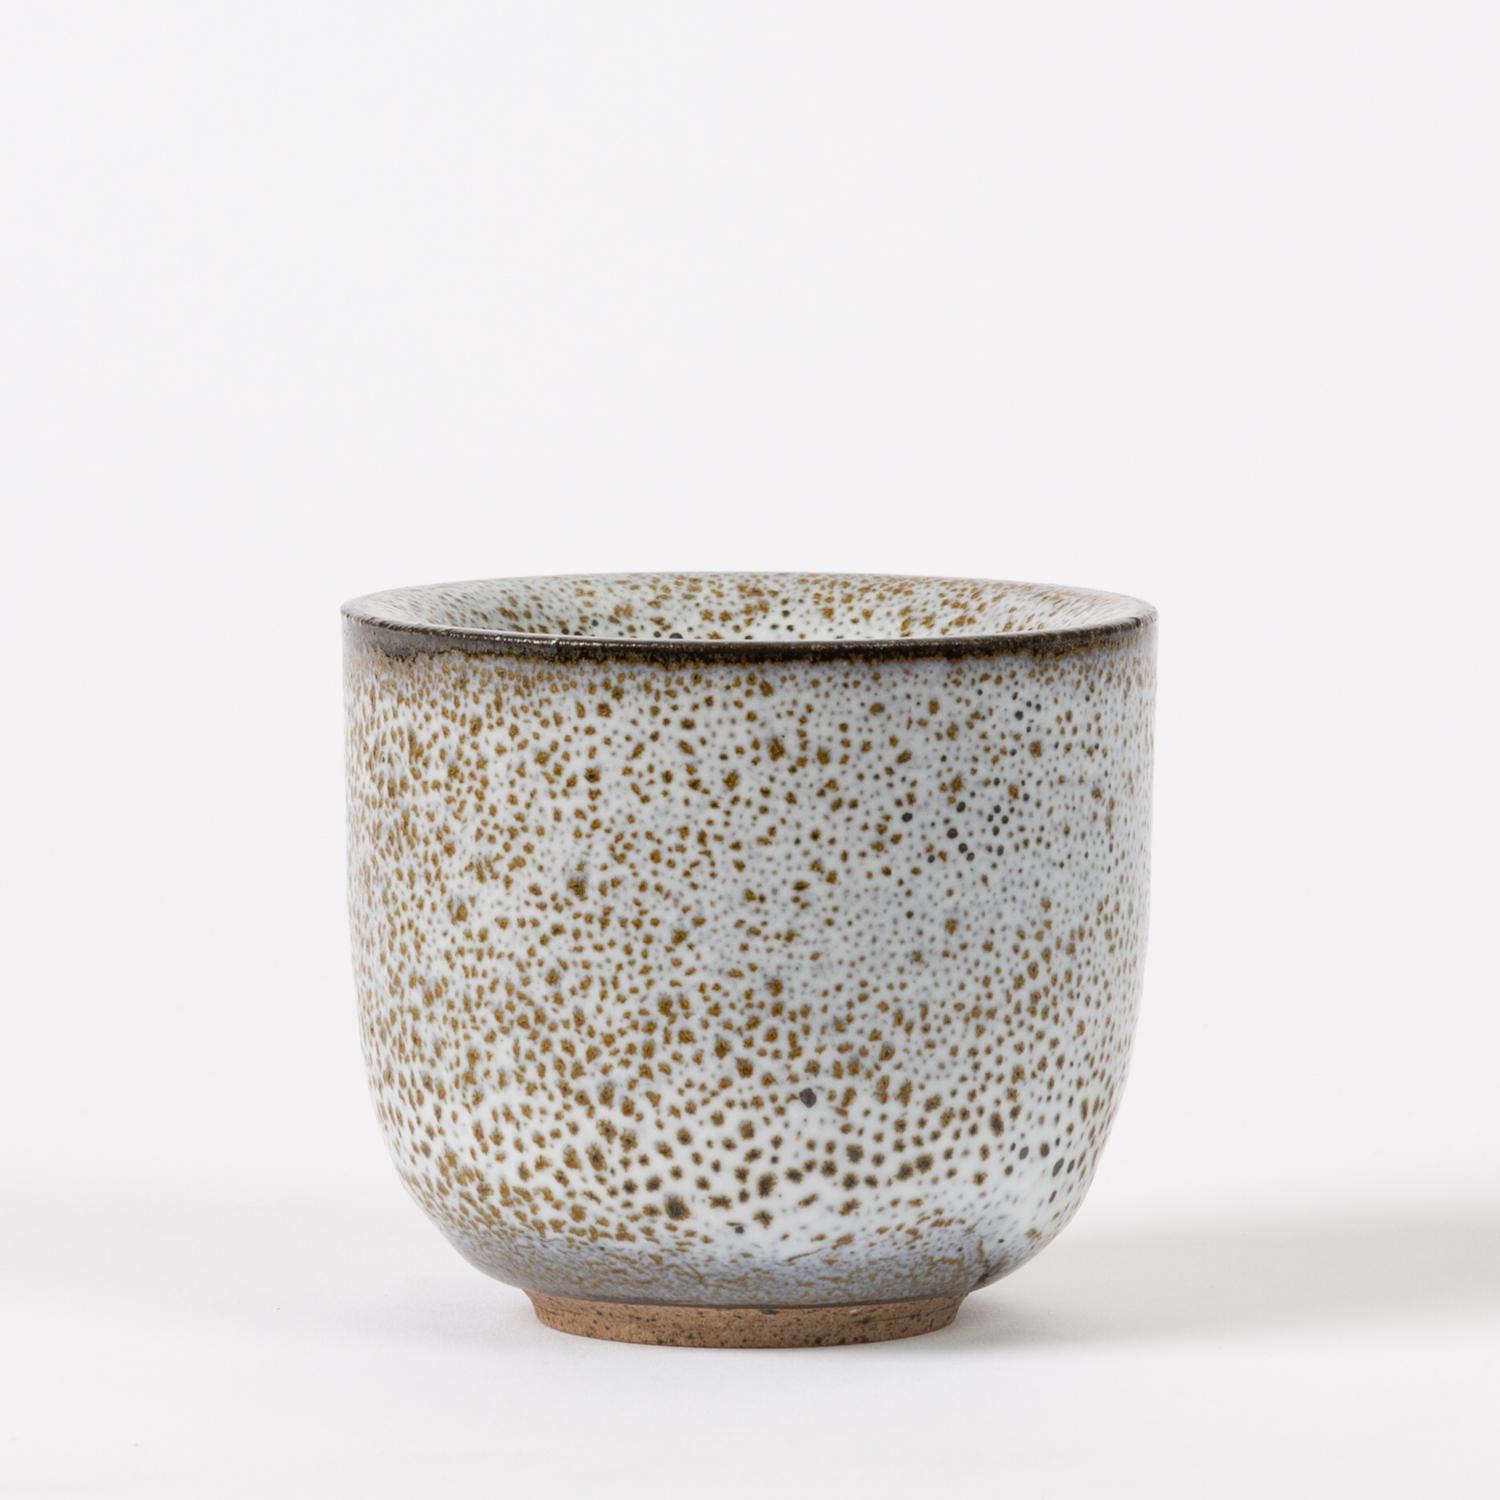 American Thick-Walled Studio Pottery Cup with Oil Spot Glaze